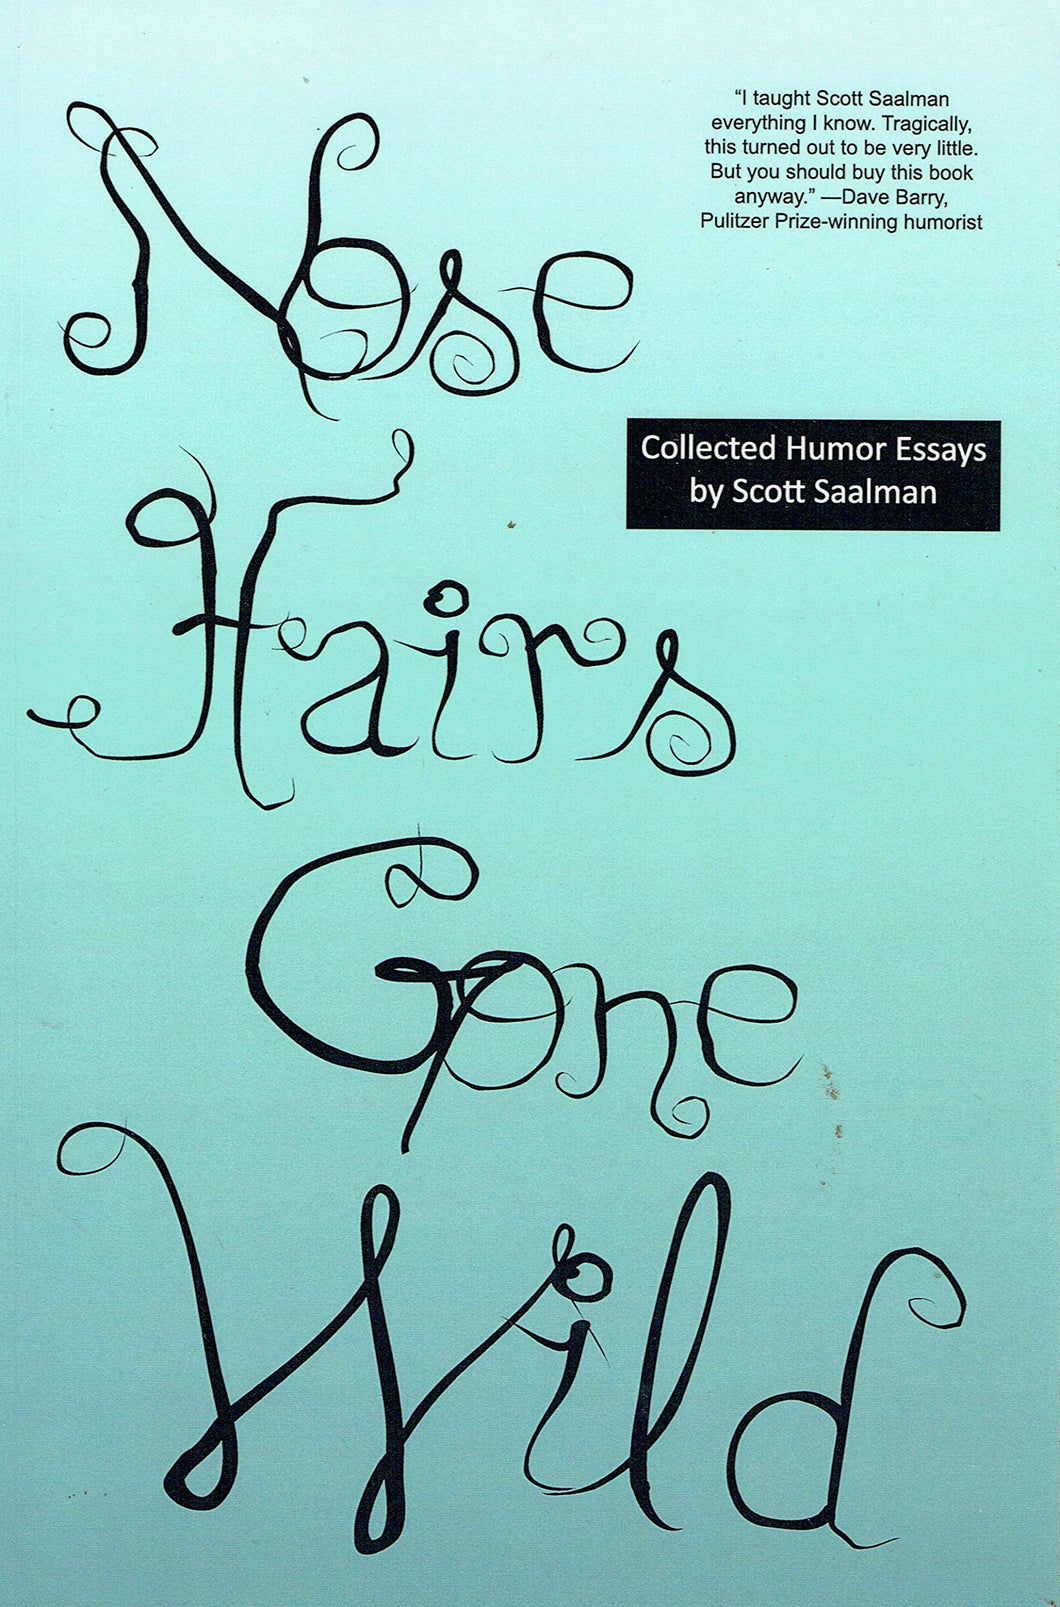 Nose Hairs Gone Wild: Collected Humor Essays by Scott Saalman